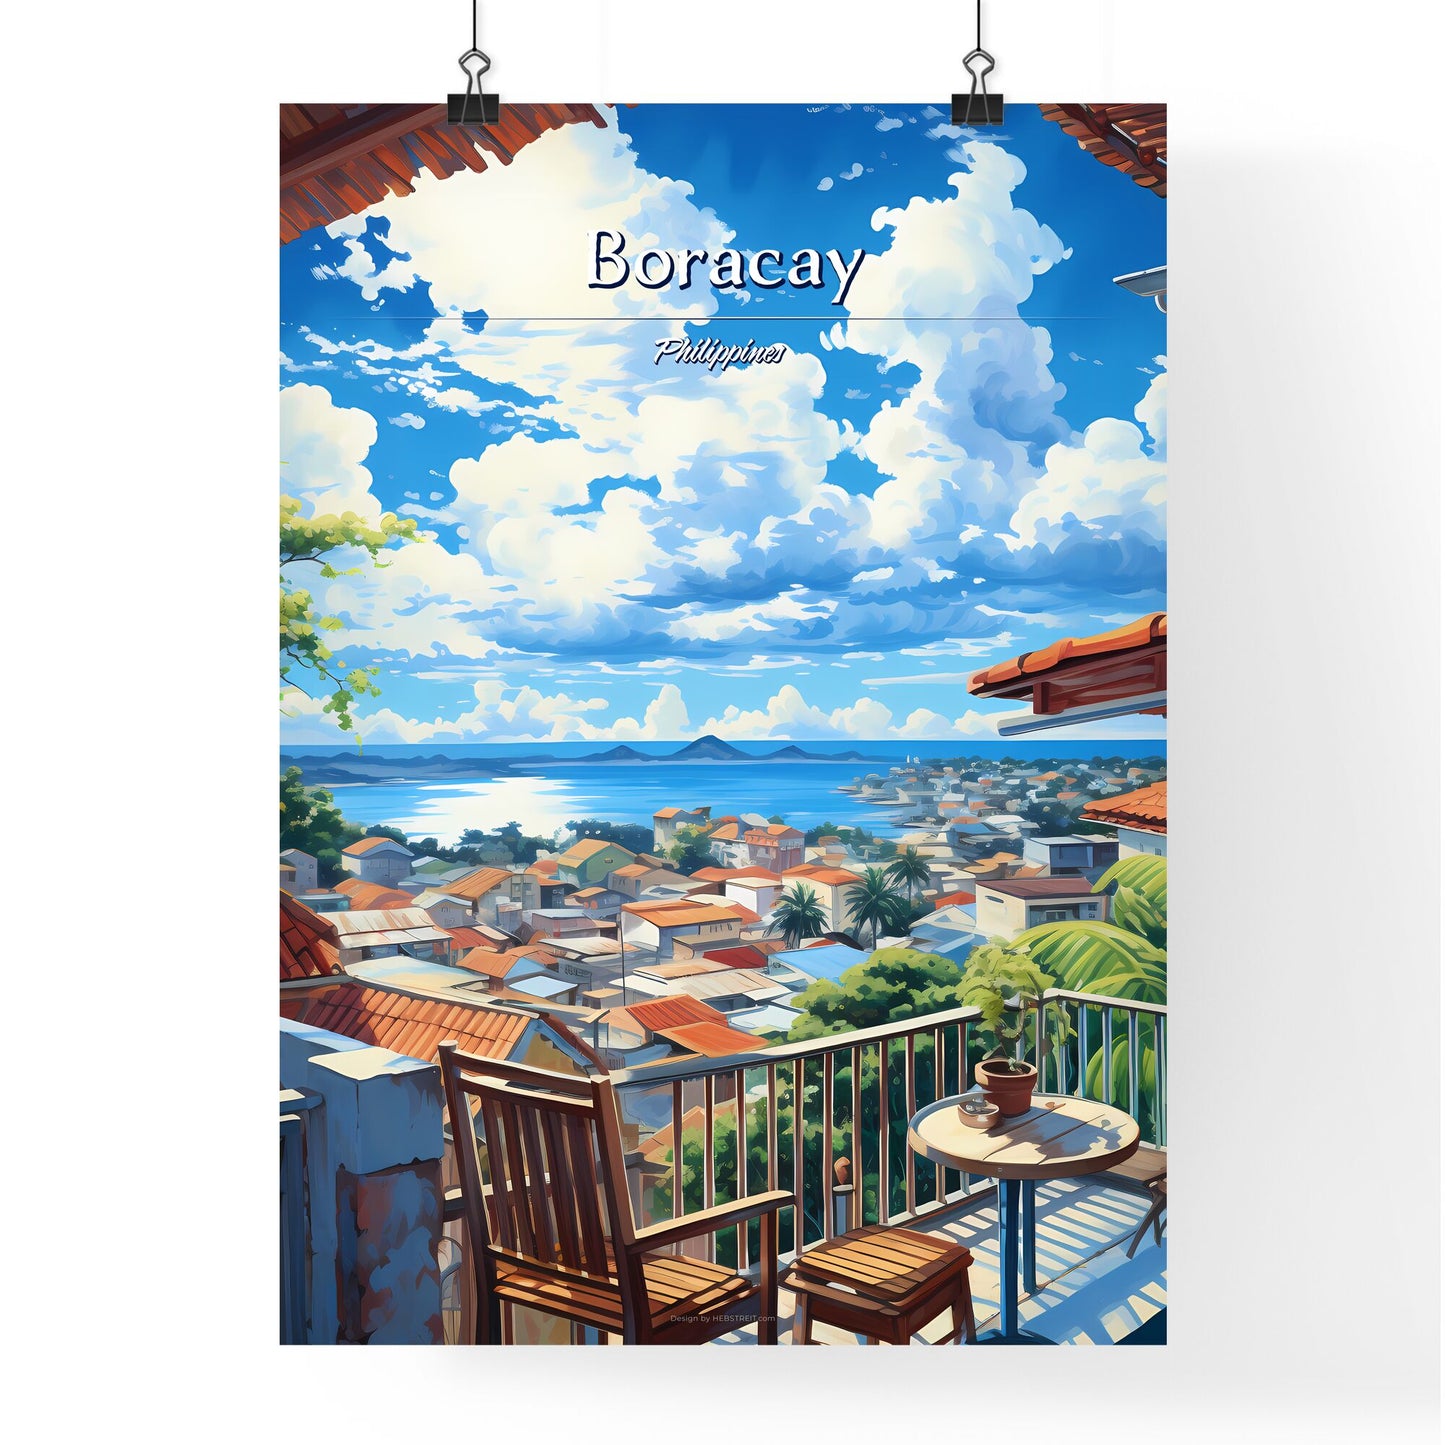 On the roofs of Boracay, Philippines - Art print of a view of a city from a balcony overlooking a body of water Default Title